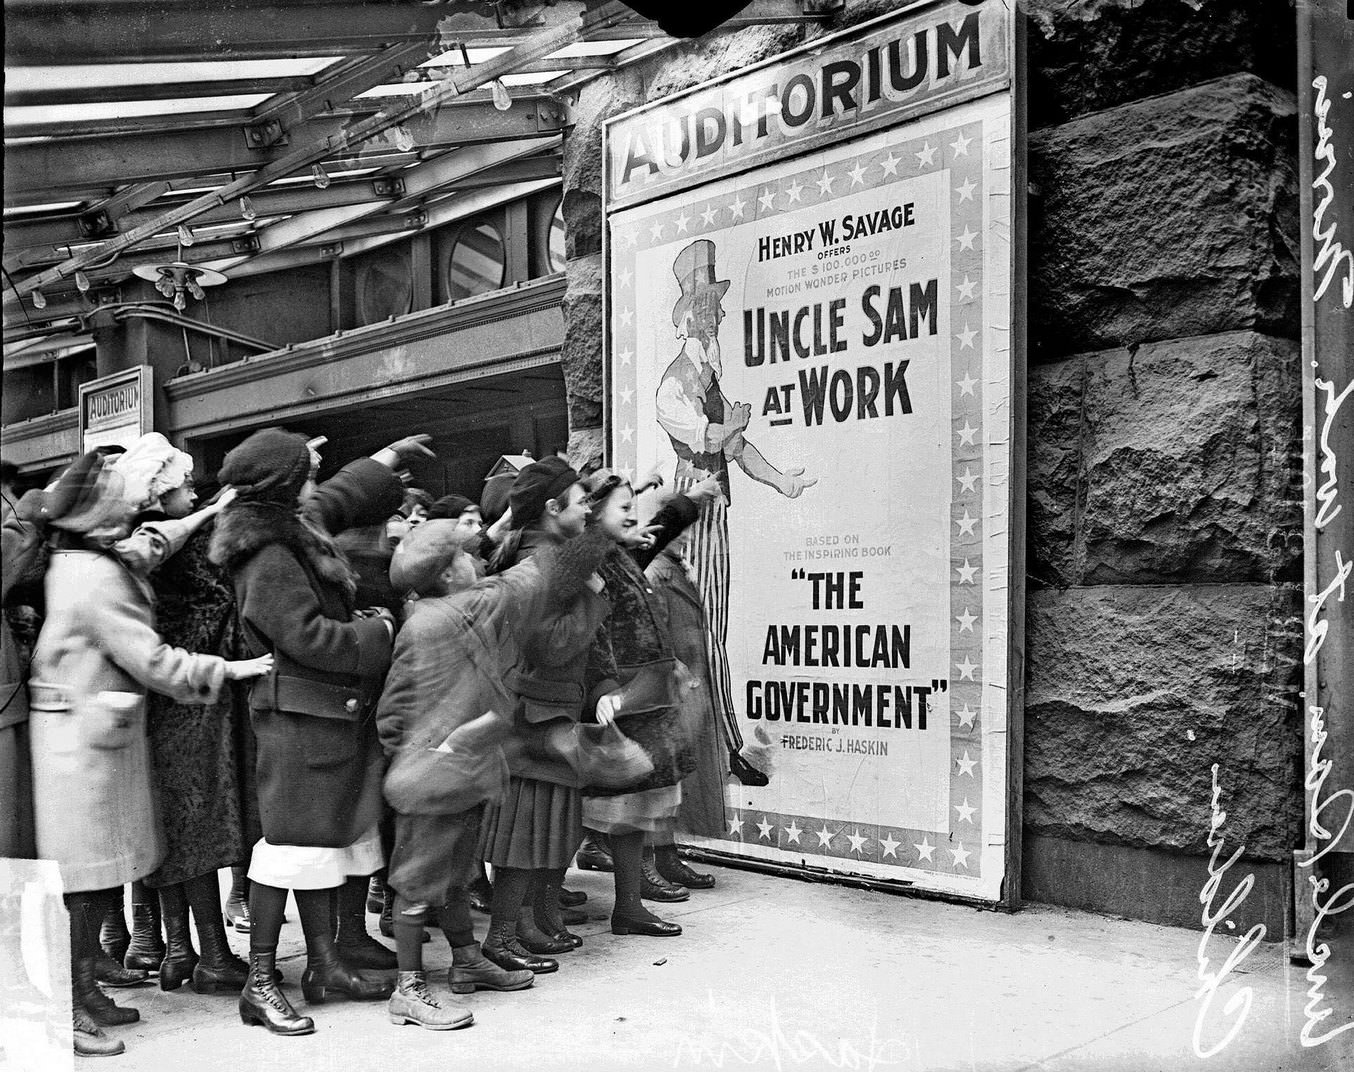 Children pointing at a movie poster for Uncle Sam at Work at the Auditorium Theater, Chicago, Illinois, February 20, 1915.